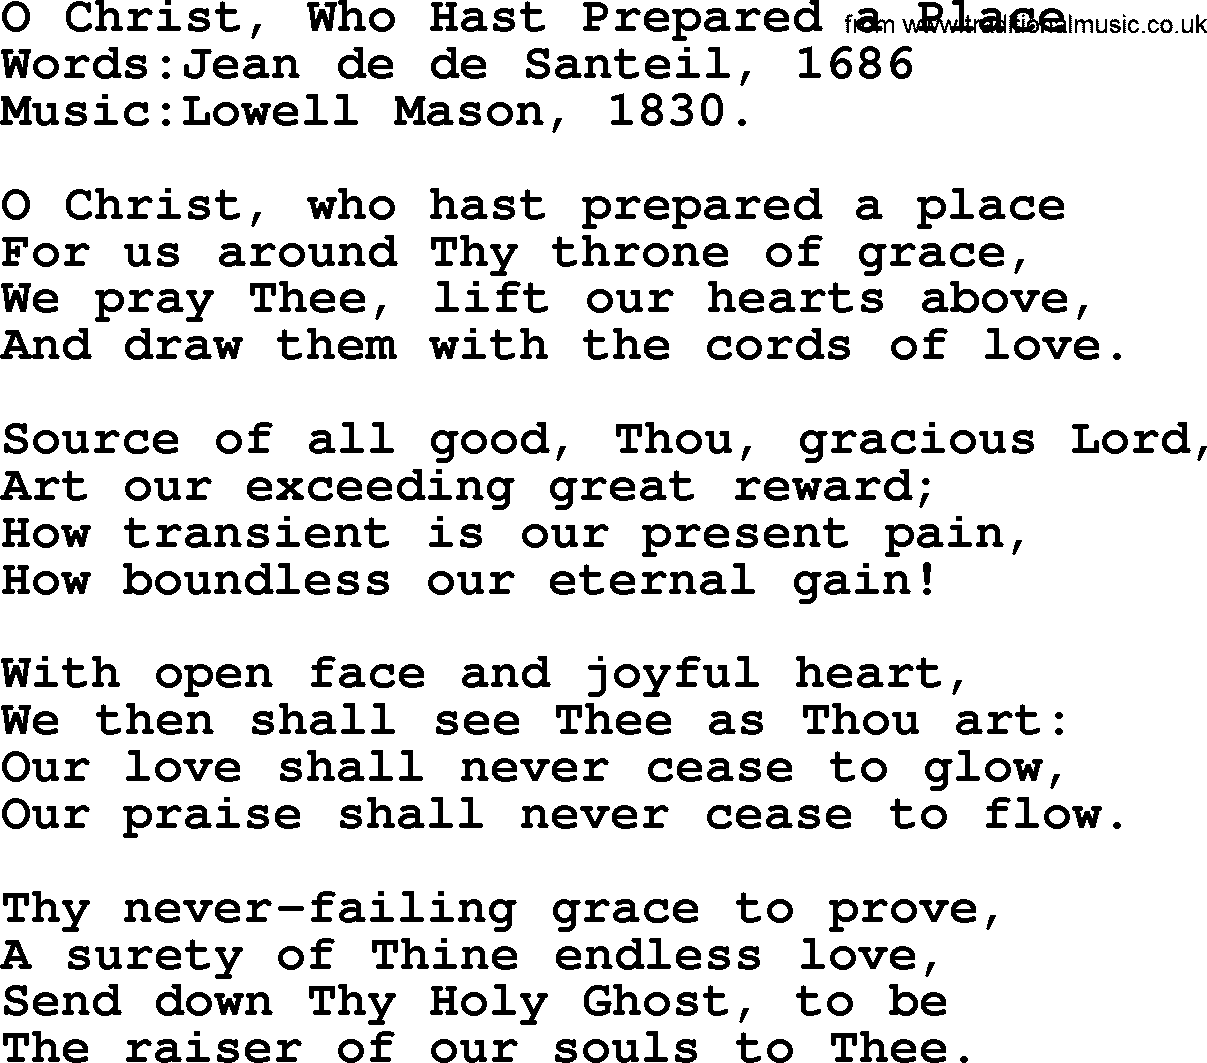 Songs and Hymns about Heaven: O Christ, Who Hast Prepared A Place lyrics with PDF